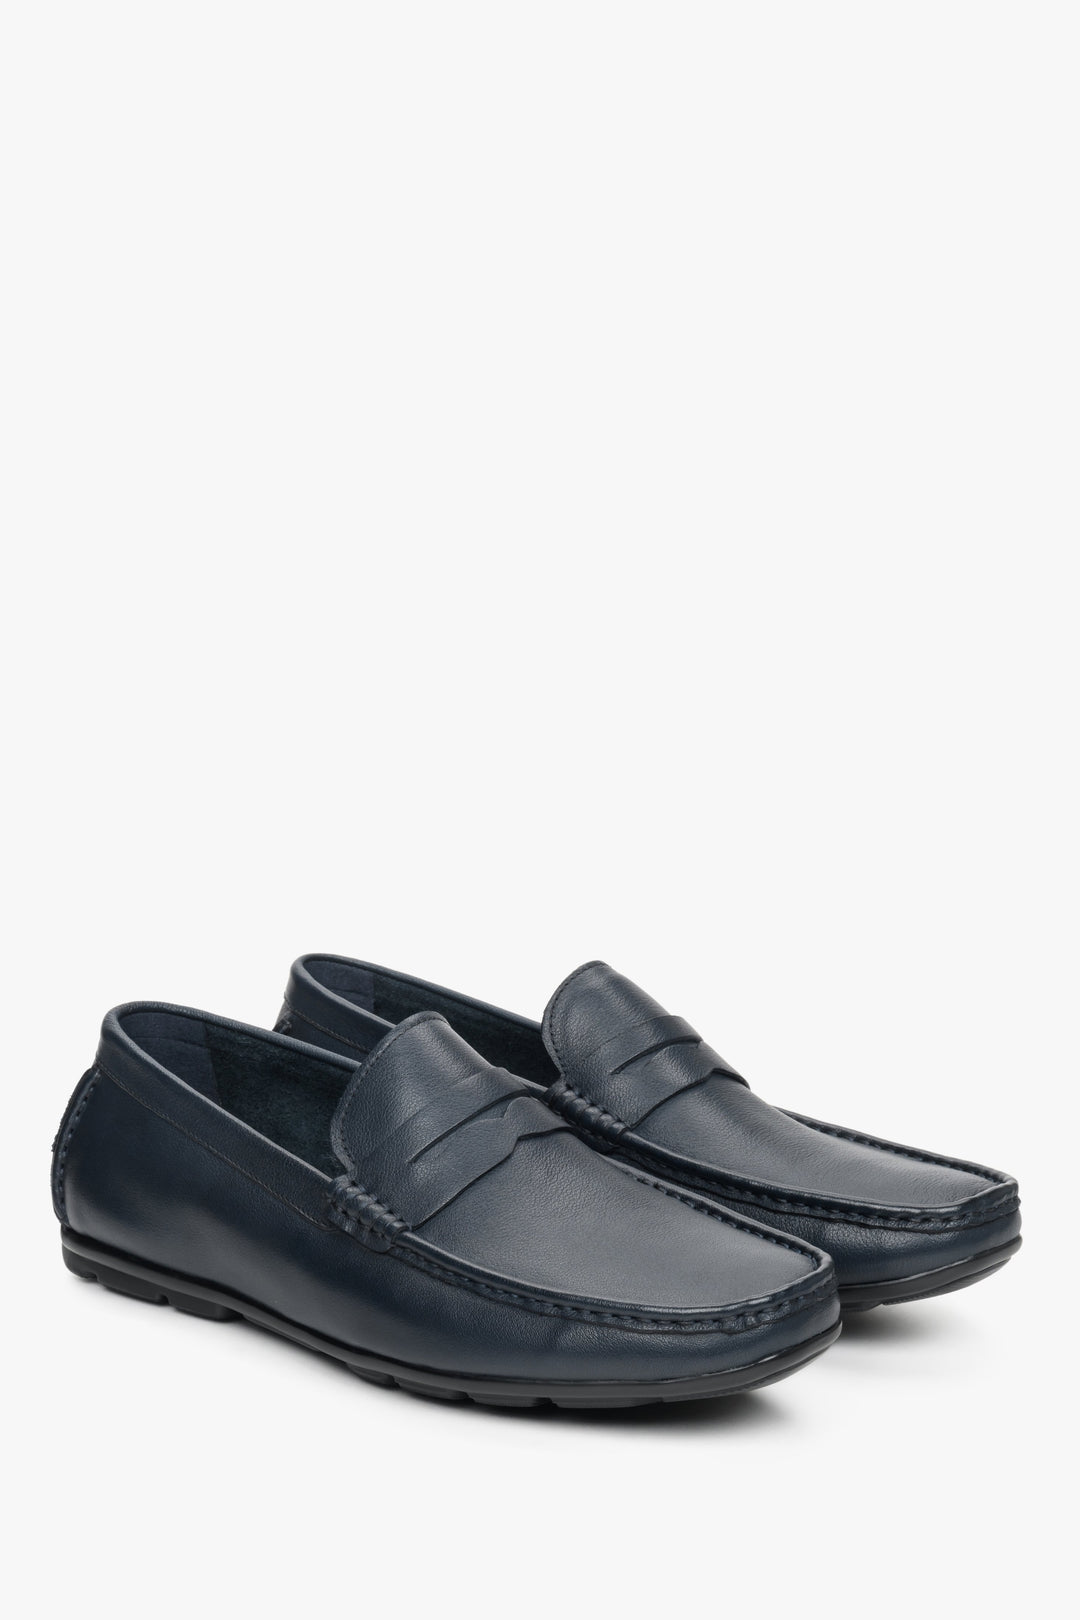 Estro men's navy blue leather loafers - presentation of the toe and side seam of the footwear.